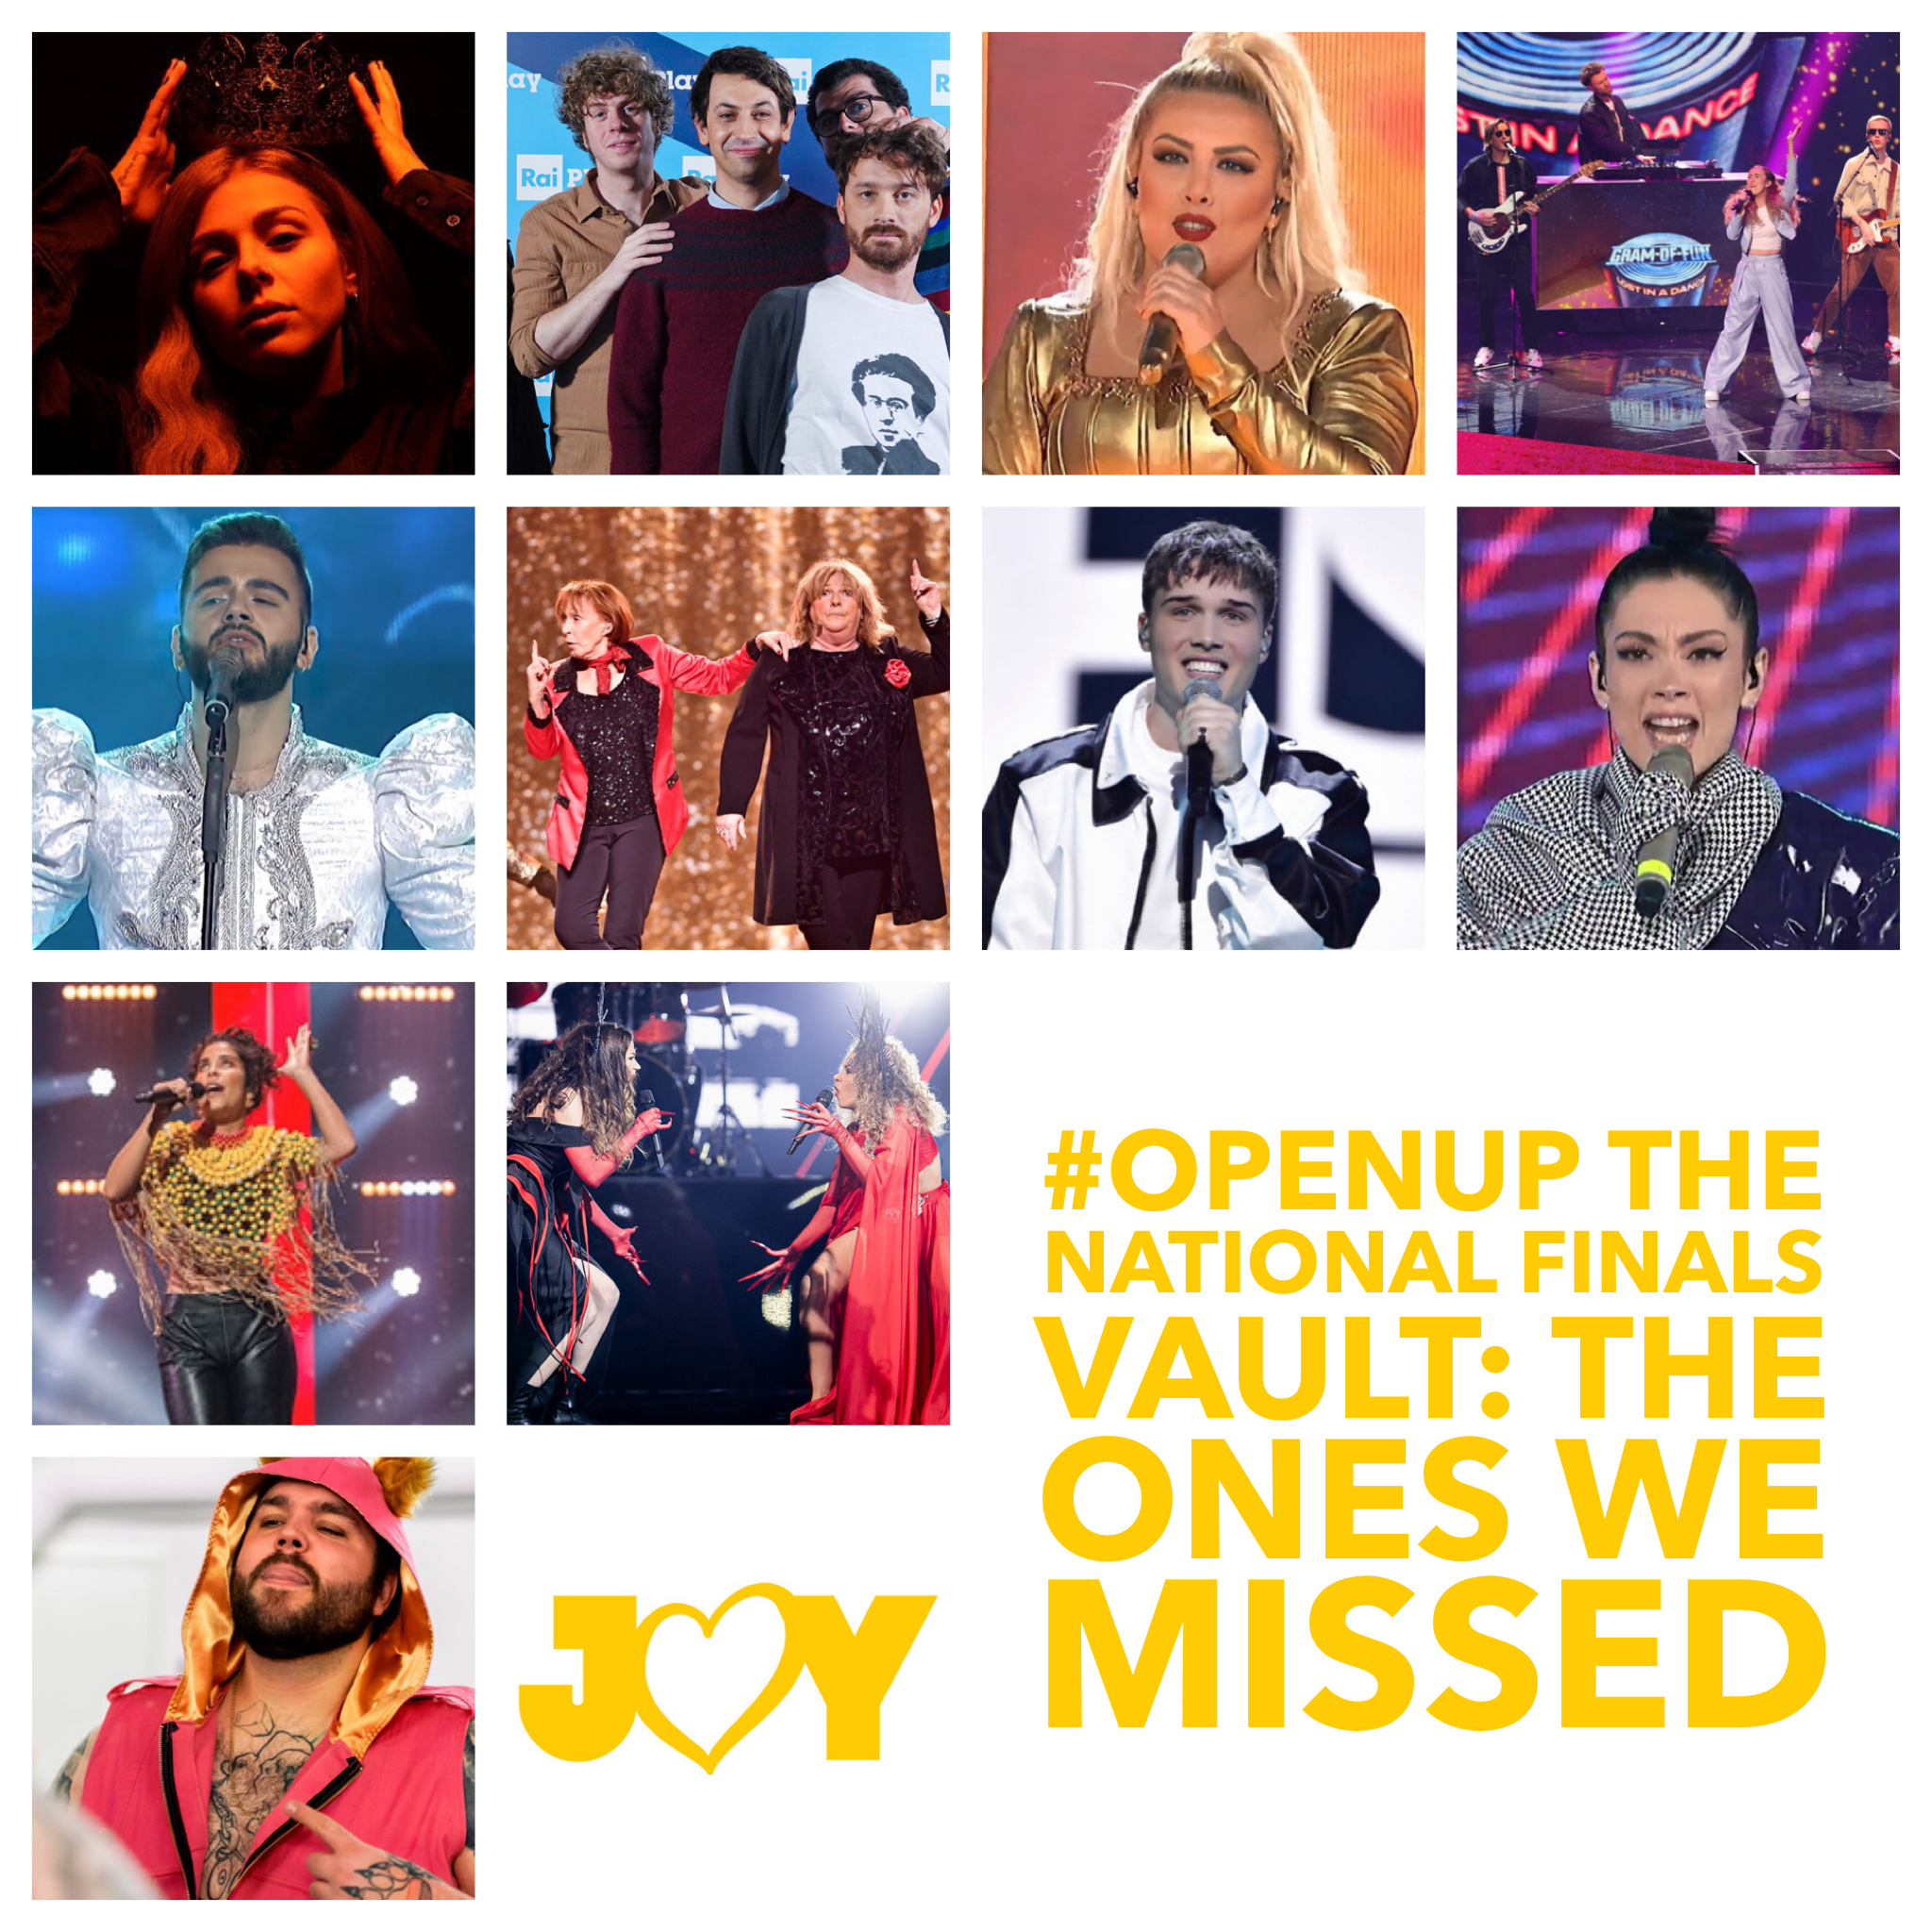 #OpenUp the 2021 Eurovision National Finals Vault: The ones we missed